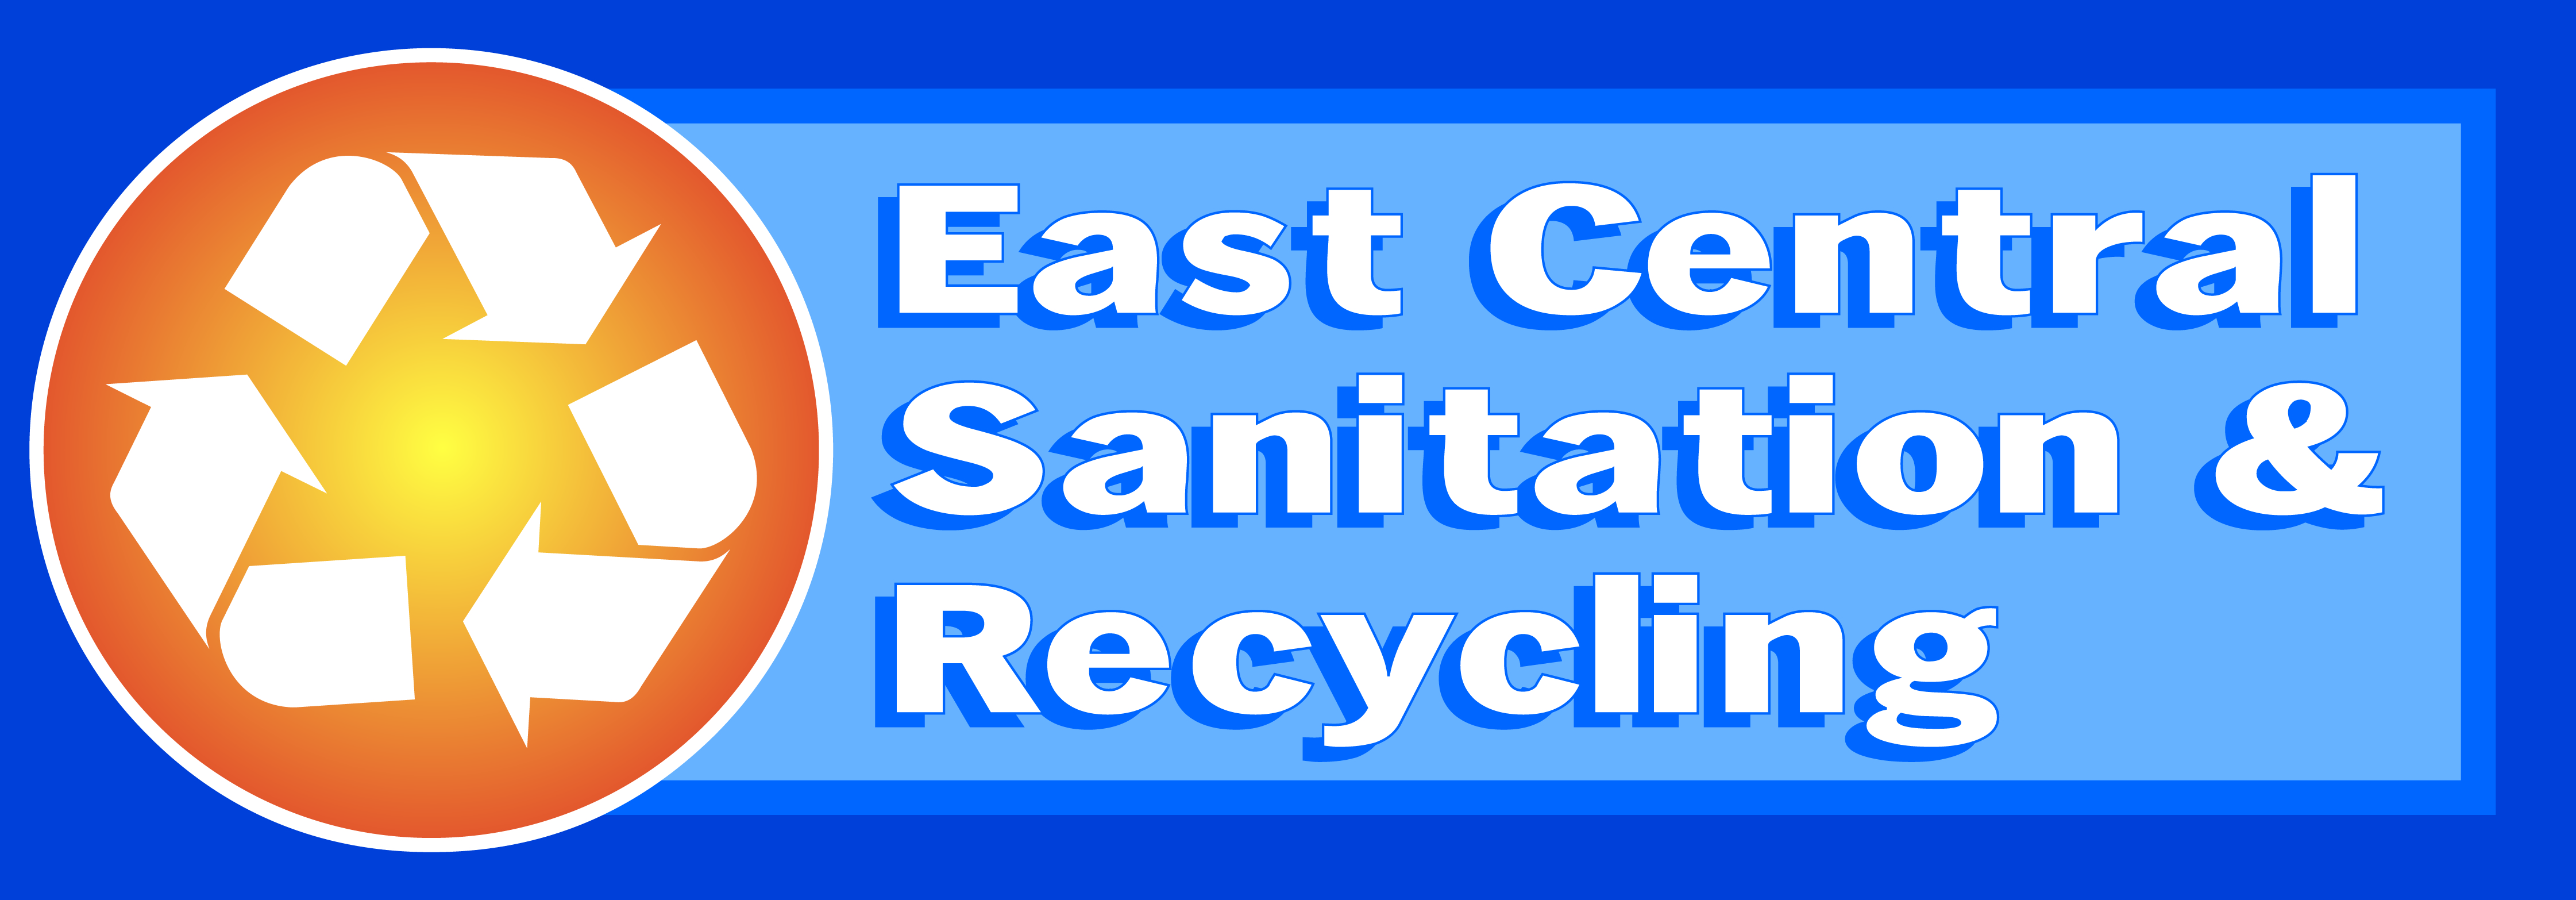 township of edison recycling and sanitation what recycling section am i